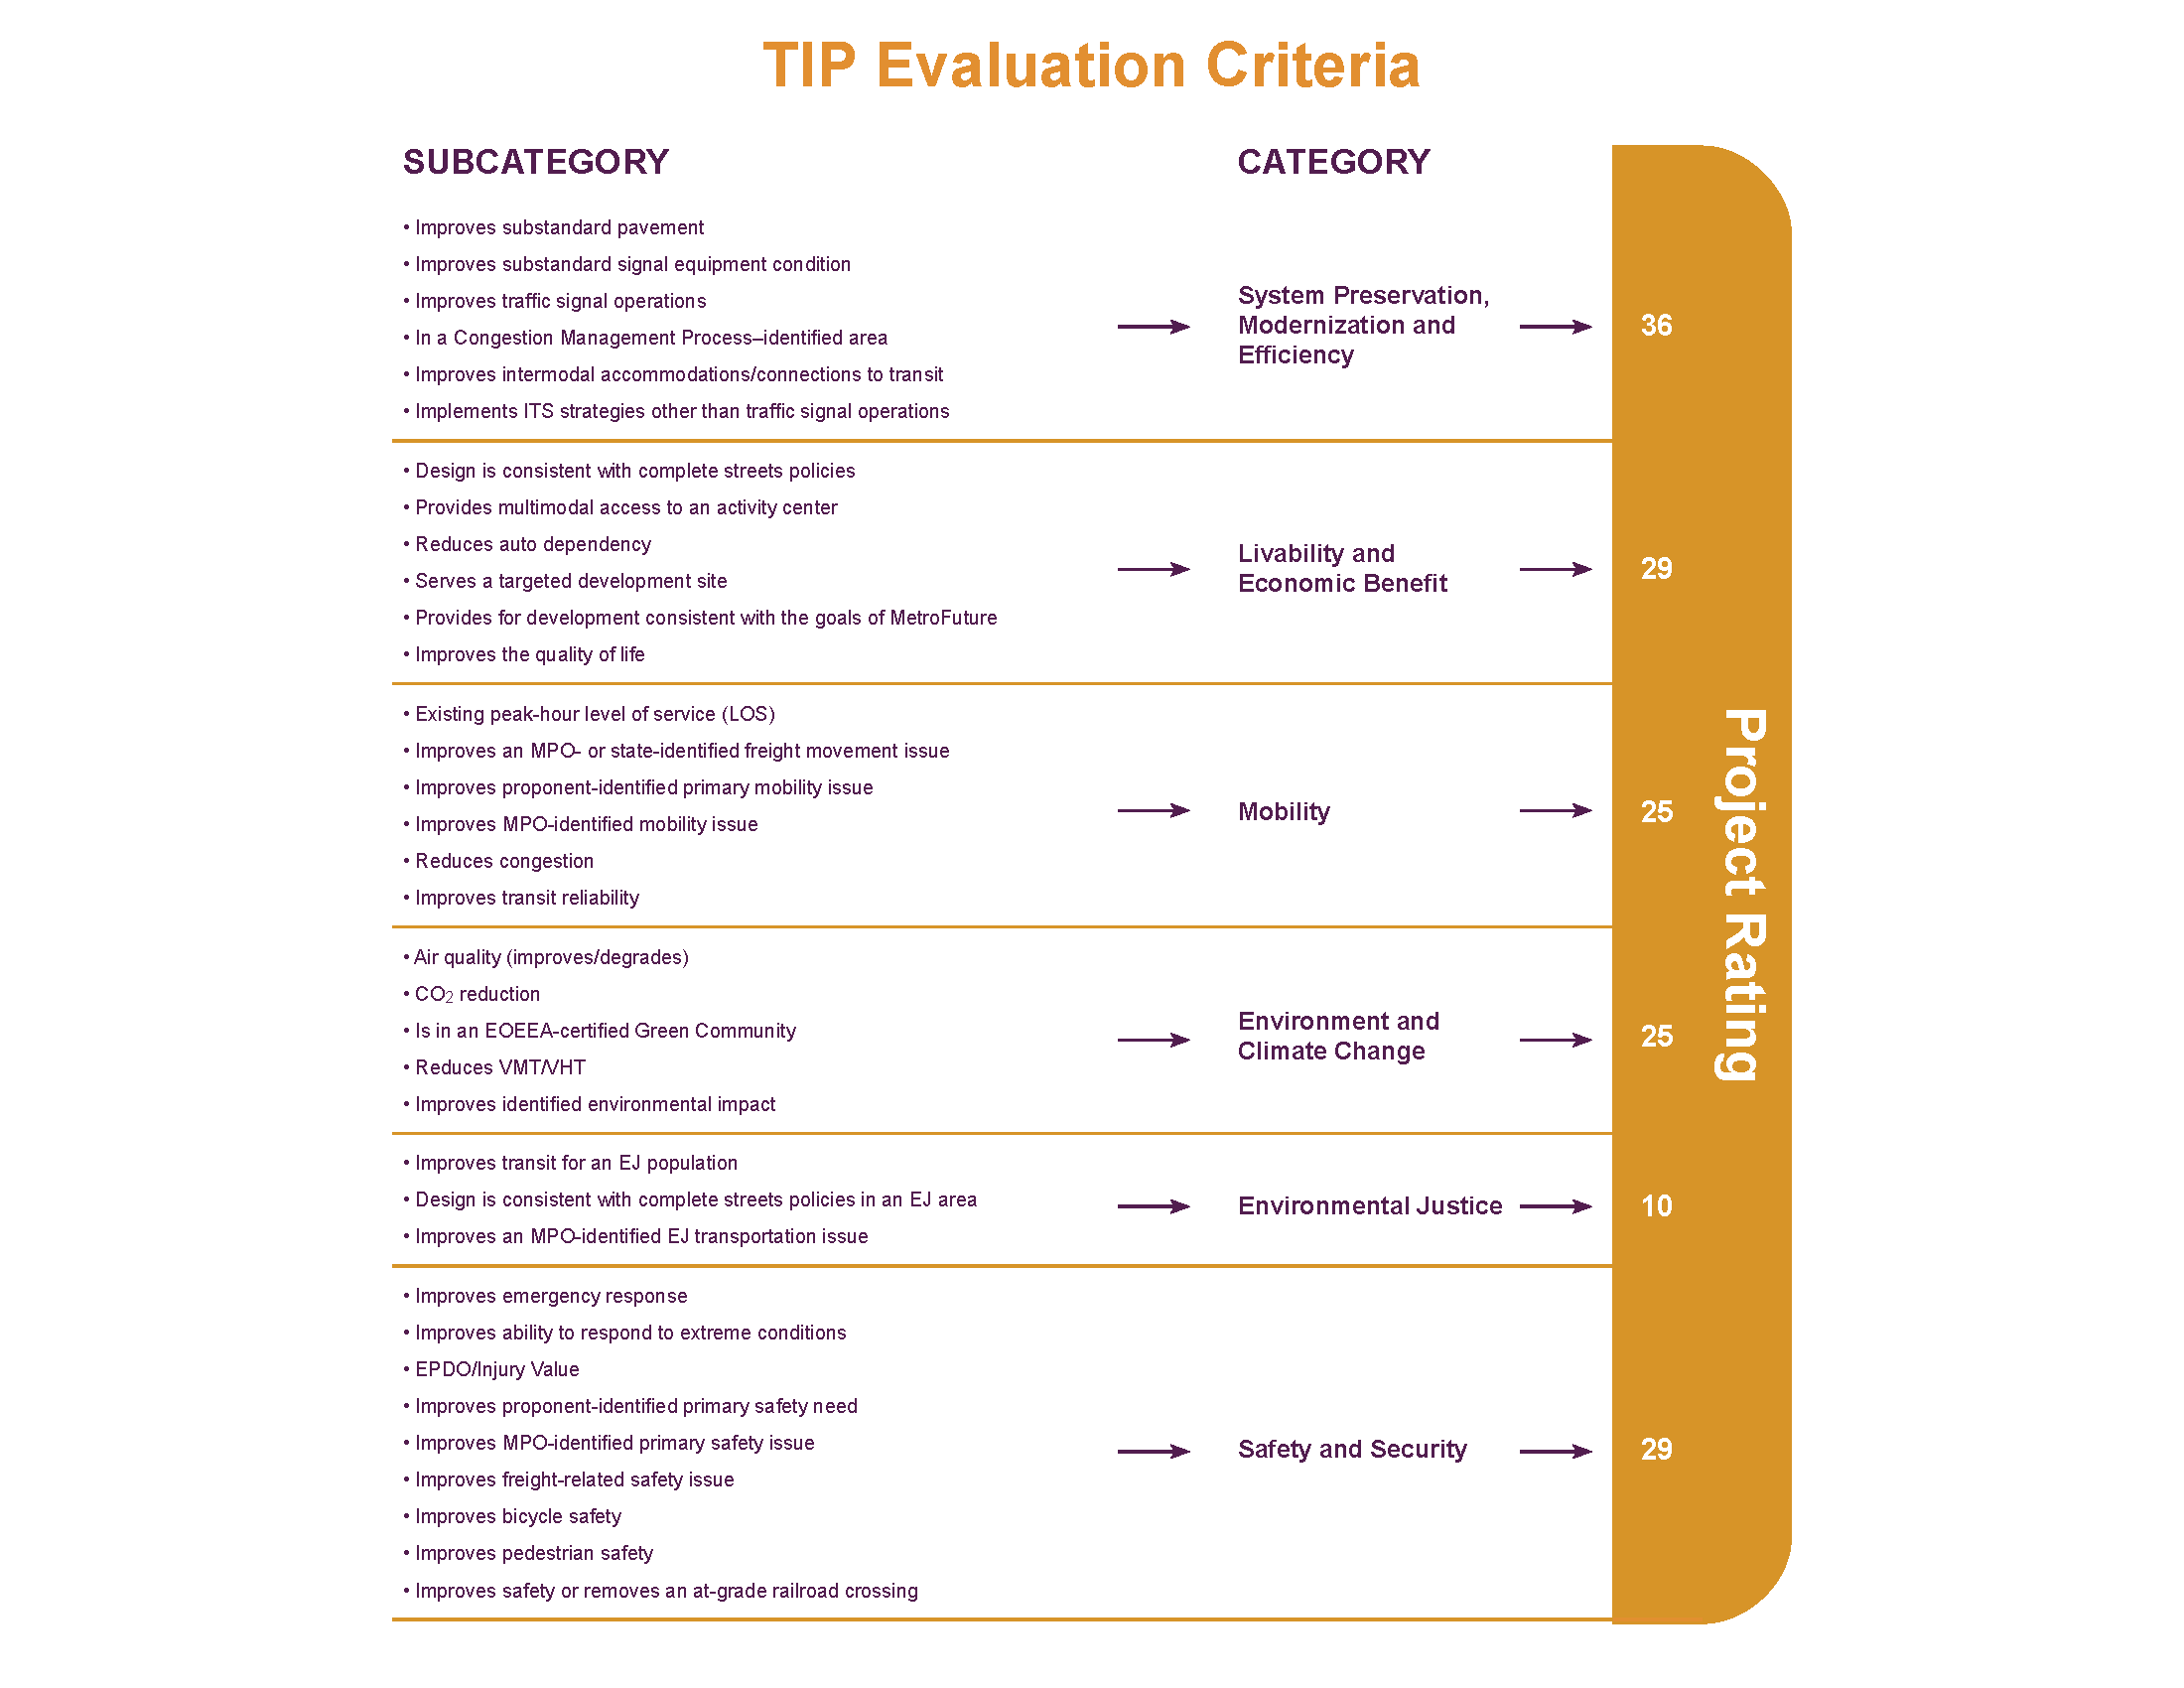 TIP Evaluation Criteria. The graphic shows 35 evaluation criteria across six policy categories that the MPO uses to score TIP projects.